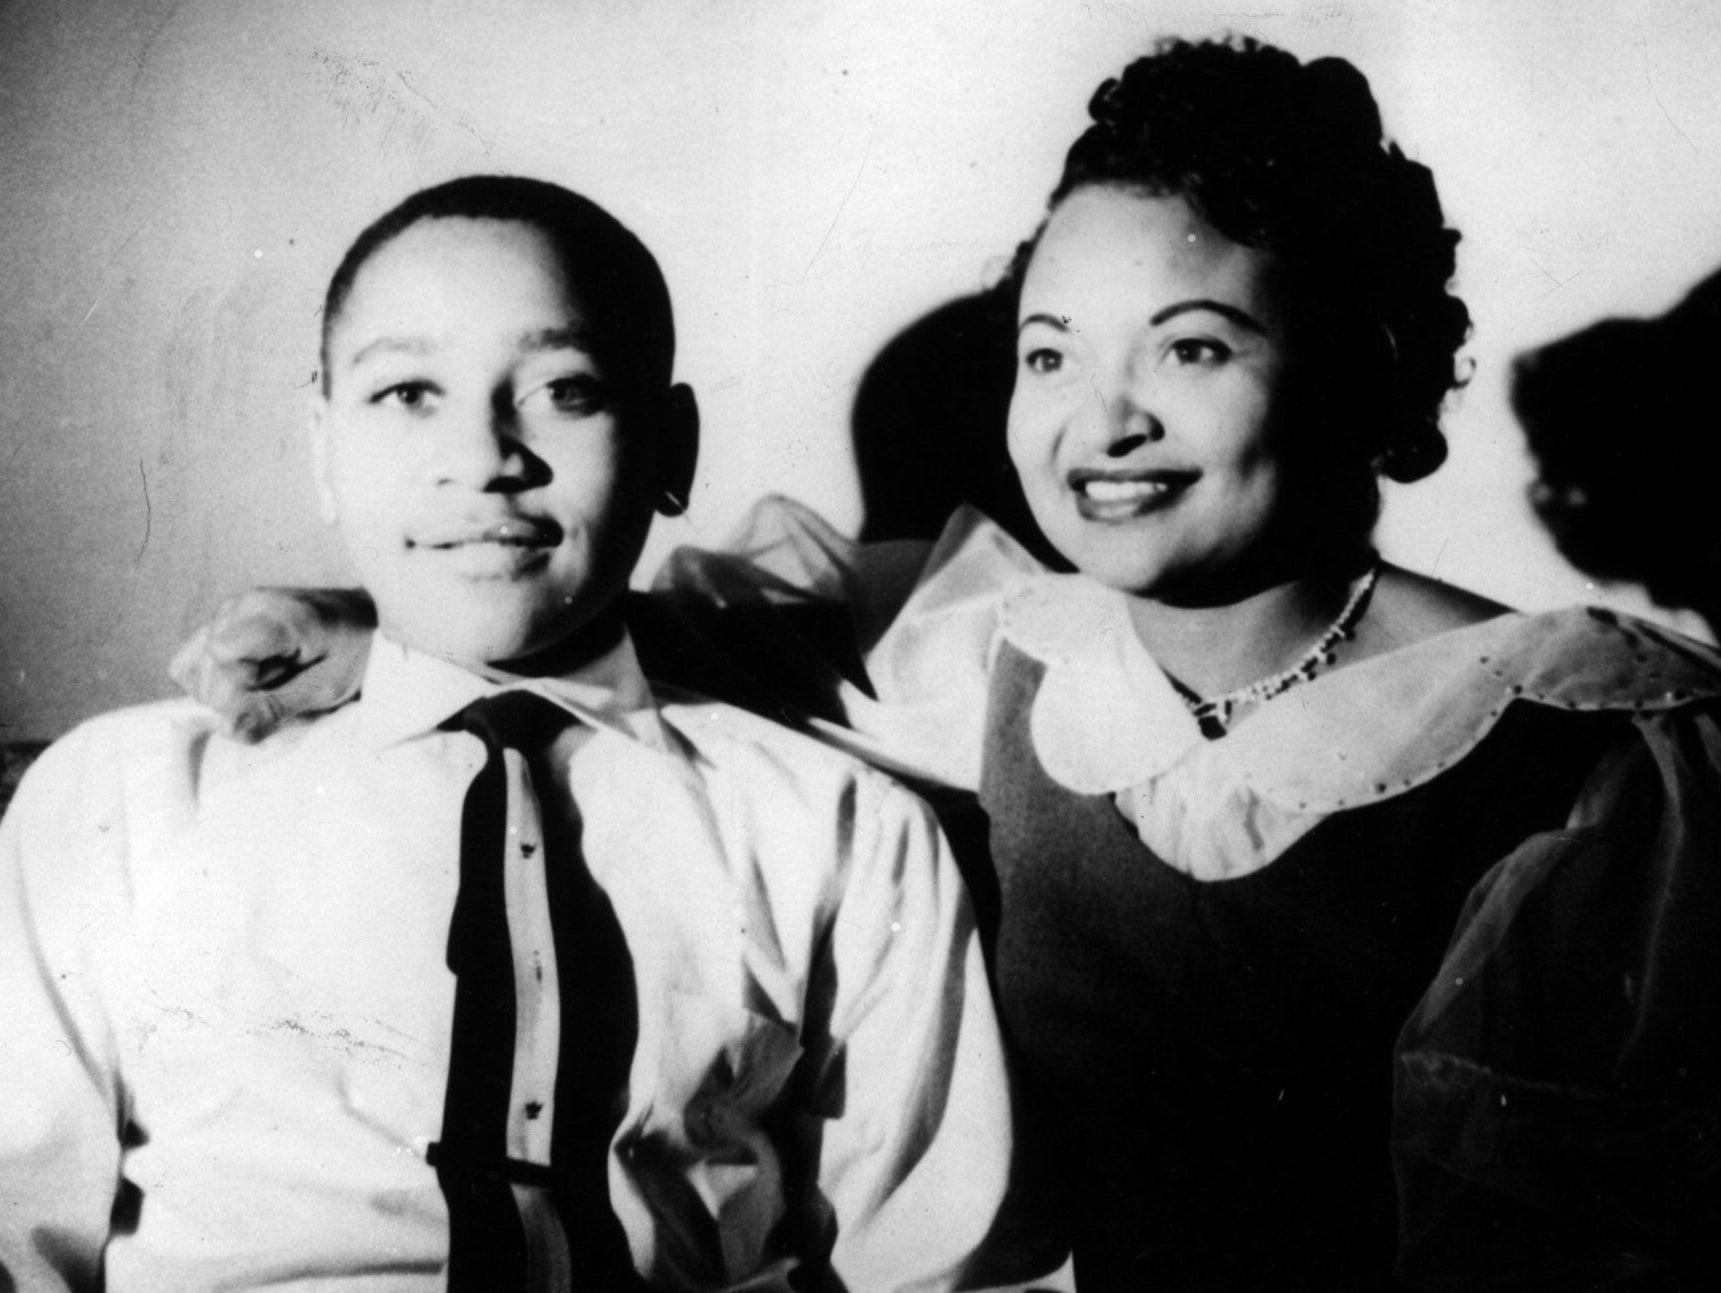 Emmett Louis Till, 14, with his mother, Mamie Till-Mobley, at home in Chicago.